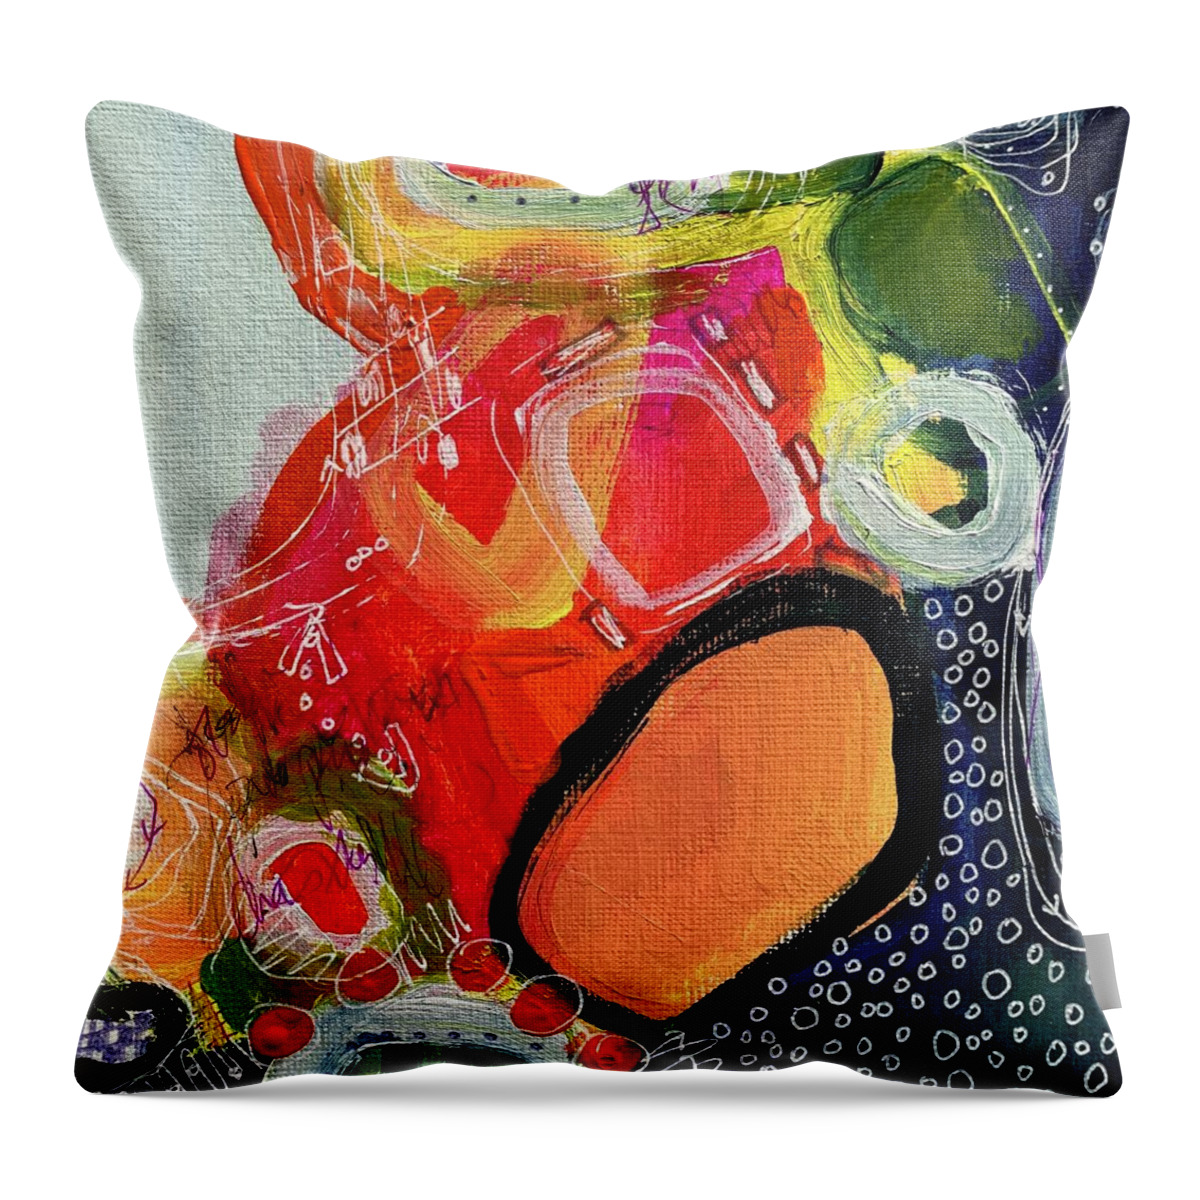 Orange Throw Pillow featuring the painting Orange And Pink #1 by Darlene Watson